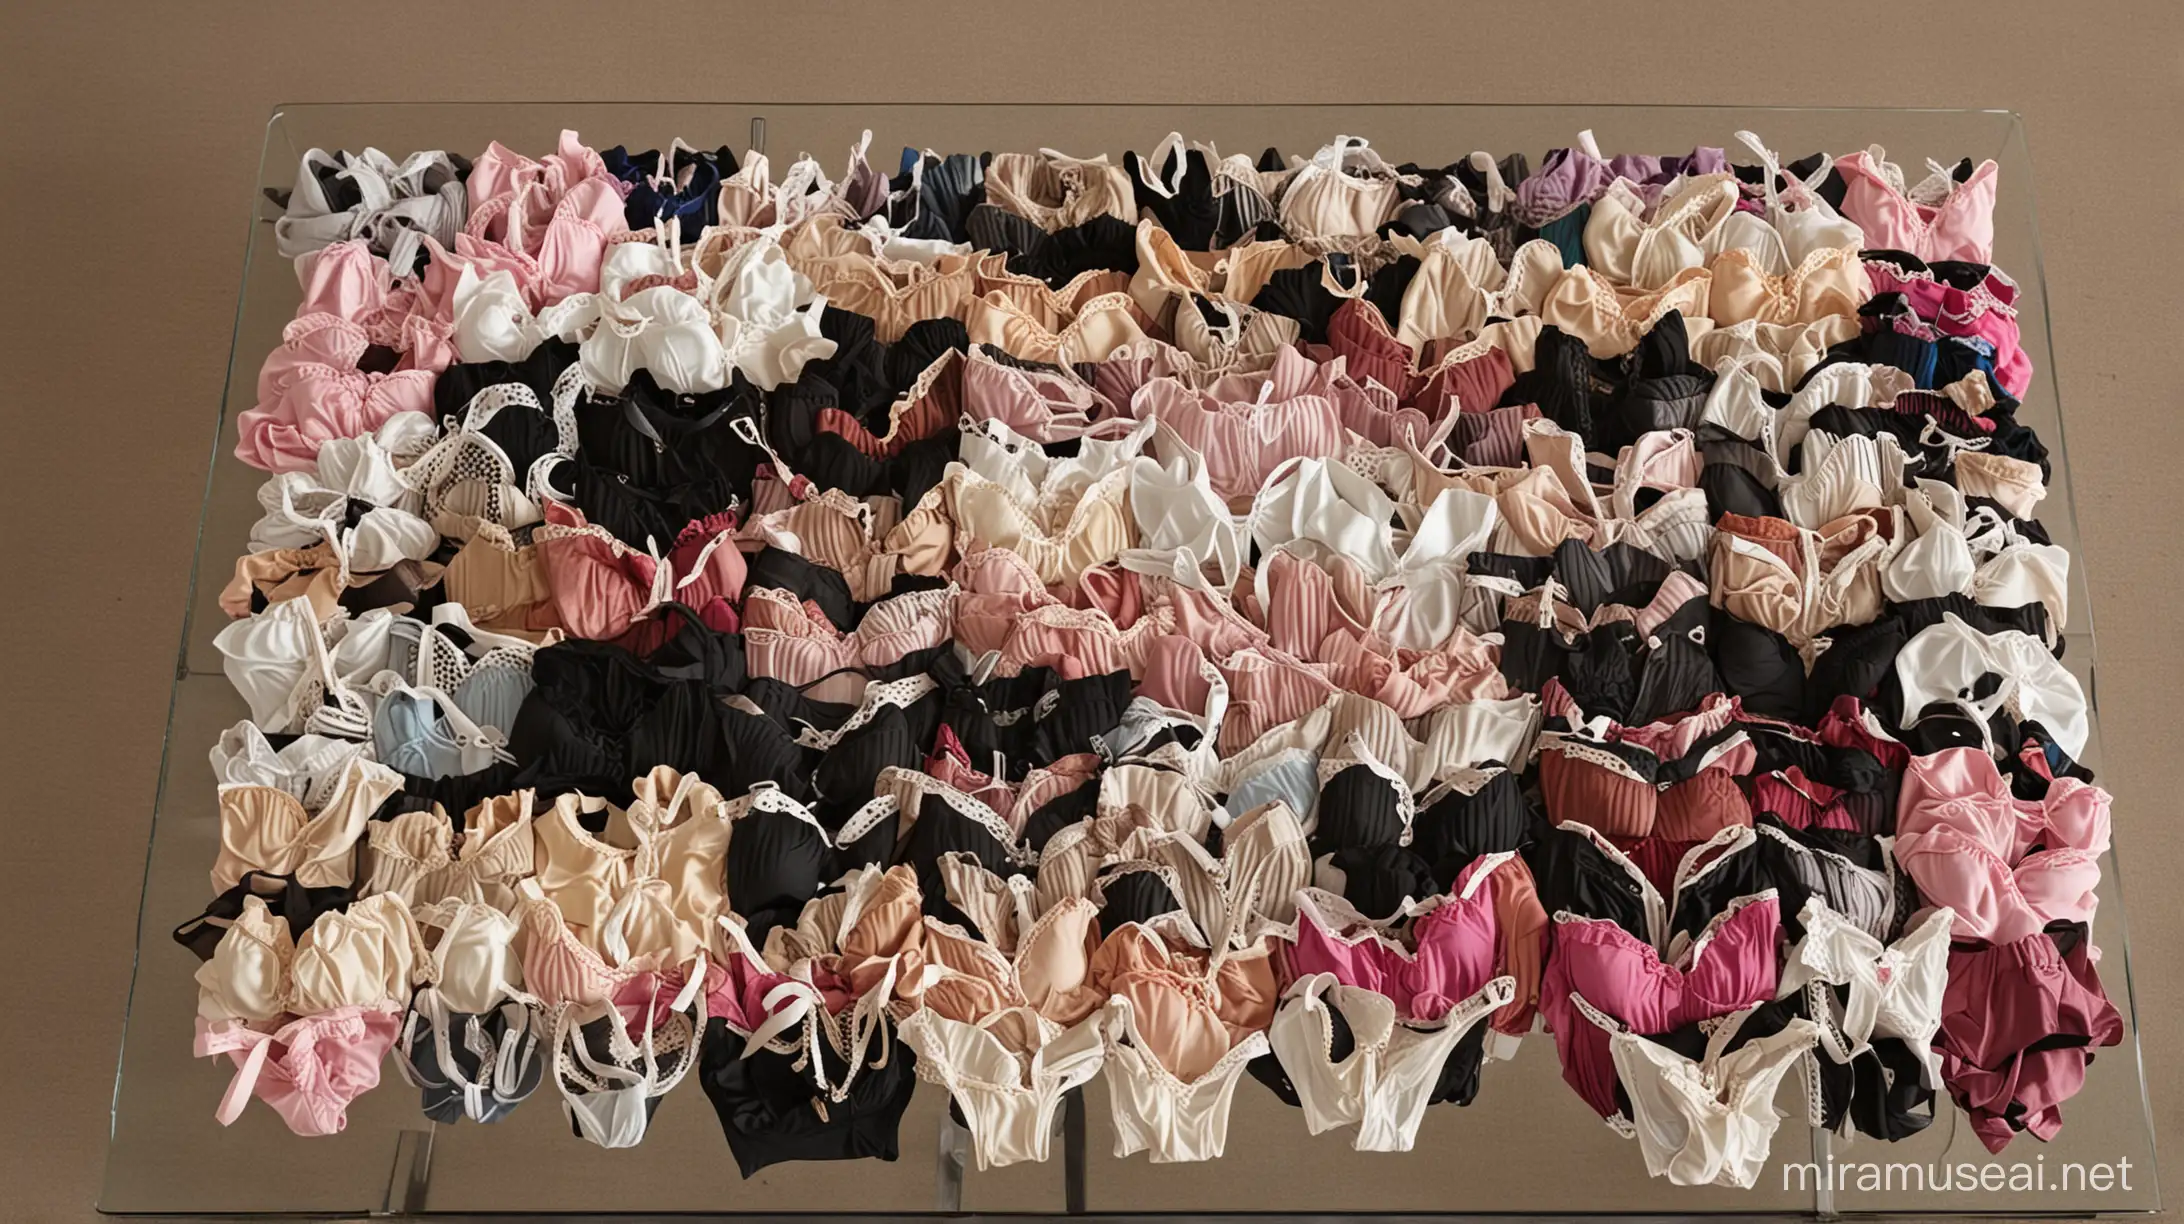 Table filled with dropped bras, panties and tights